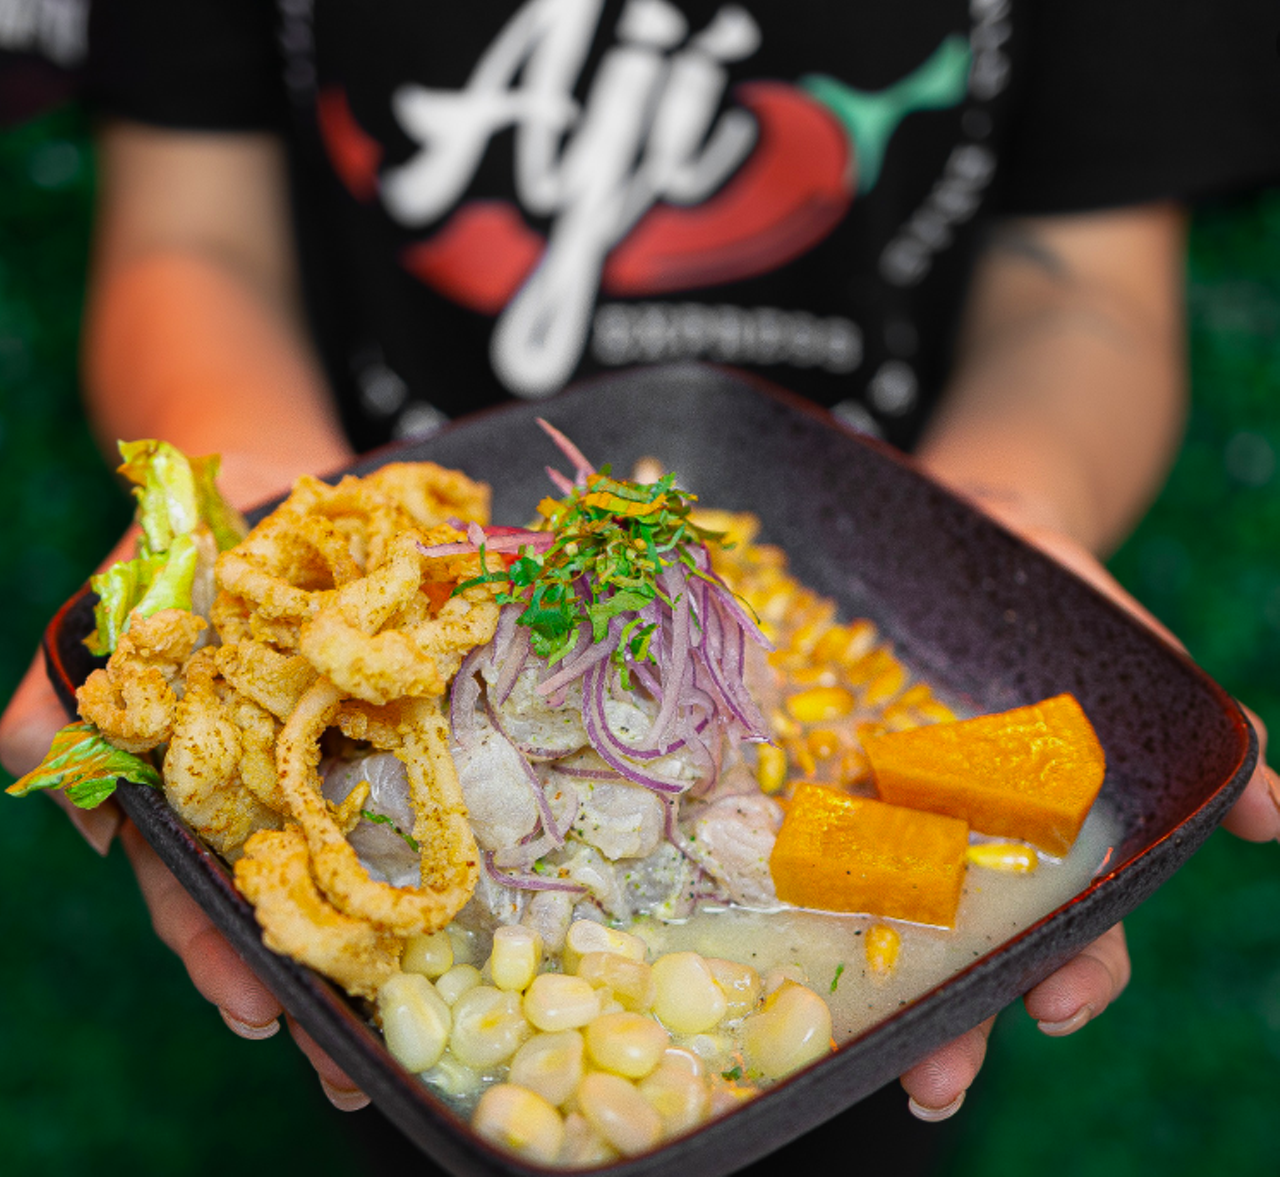 Aji Express
5928 Butler National Drive, Orlando
Sister operation to Aji Ceviche Bar in Casselberry and South OBT has opened near the airport. 
Photo via Aji Express/Facebook